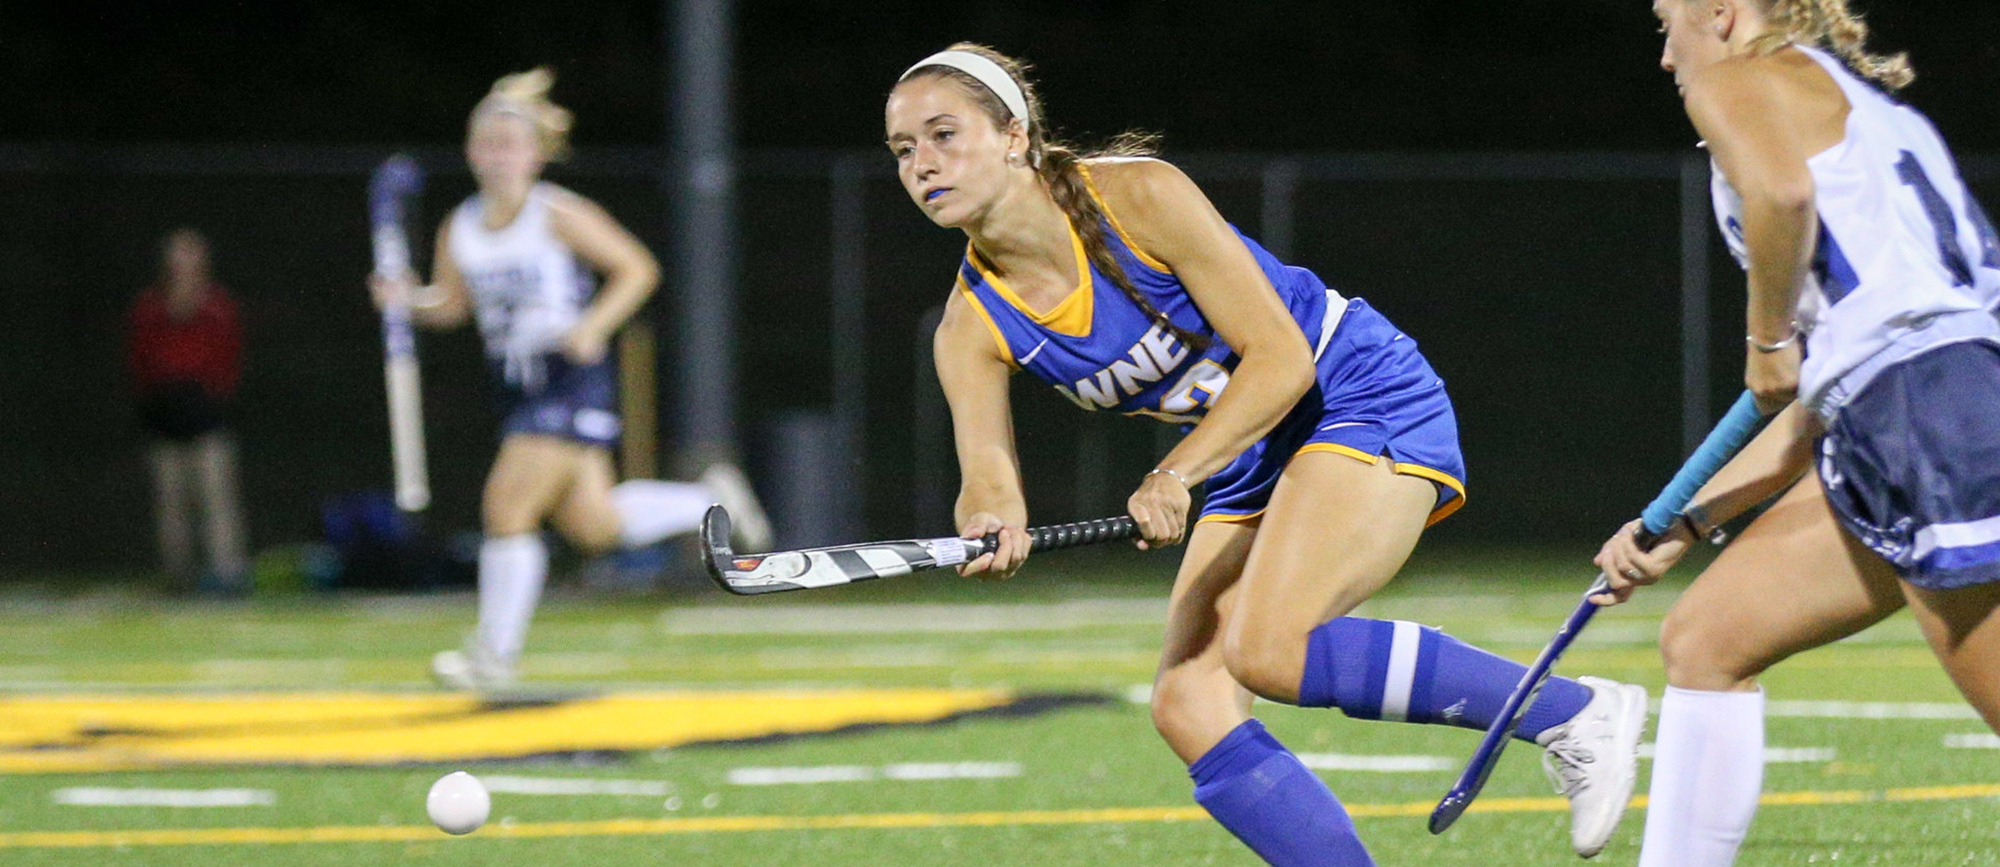 Jackie Clark recorded two goals and one assist as Western New England defeated Gordon 4-0 on Tuesday. (Photo by Chris Marion)